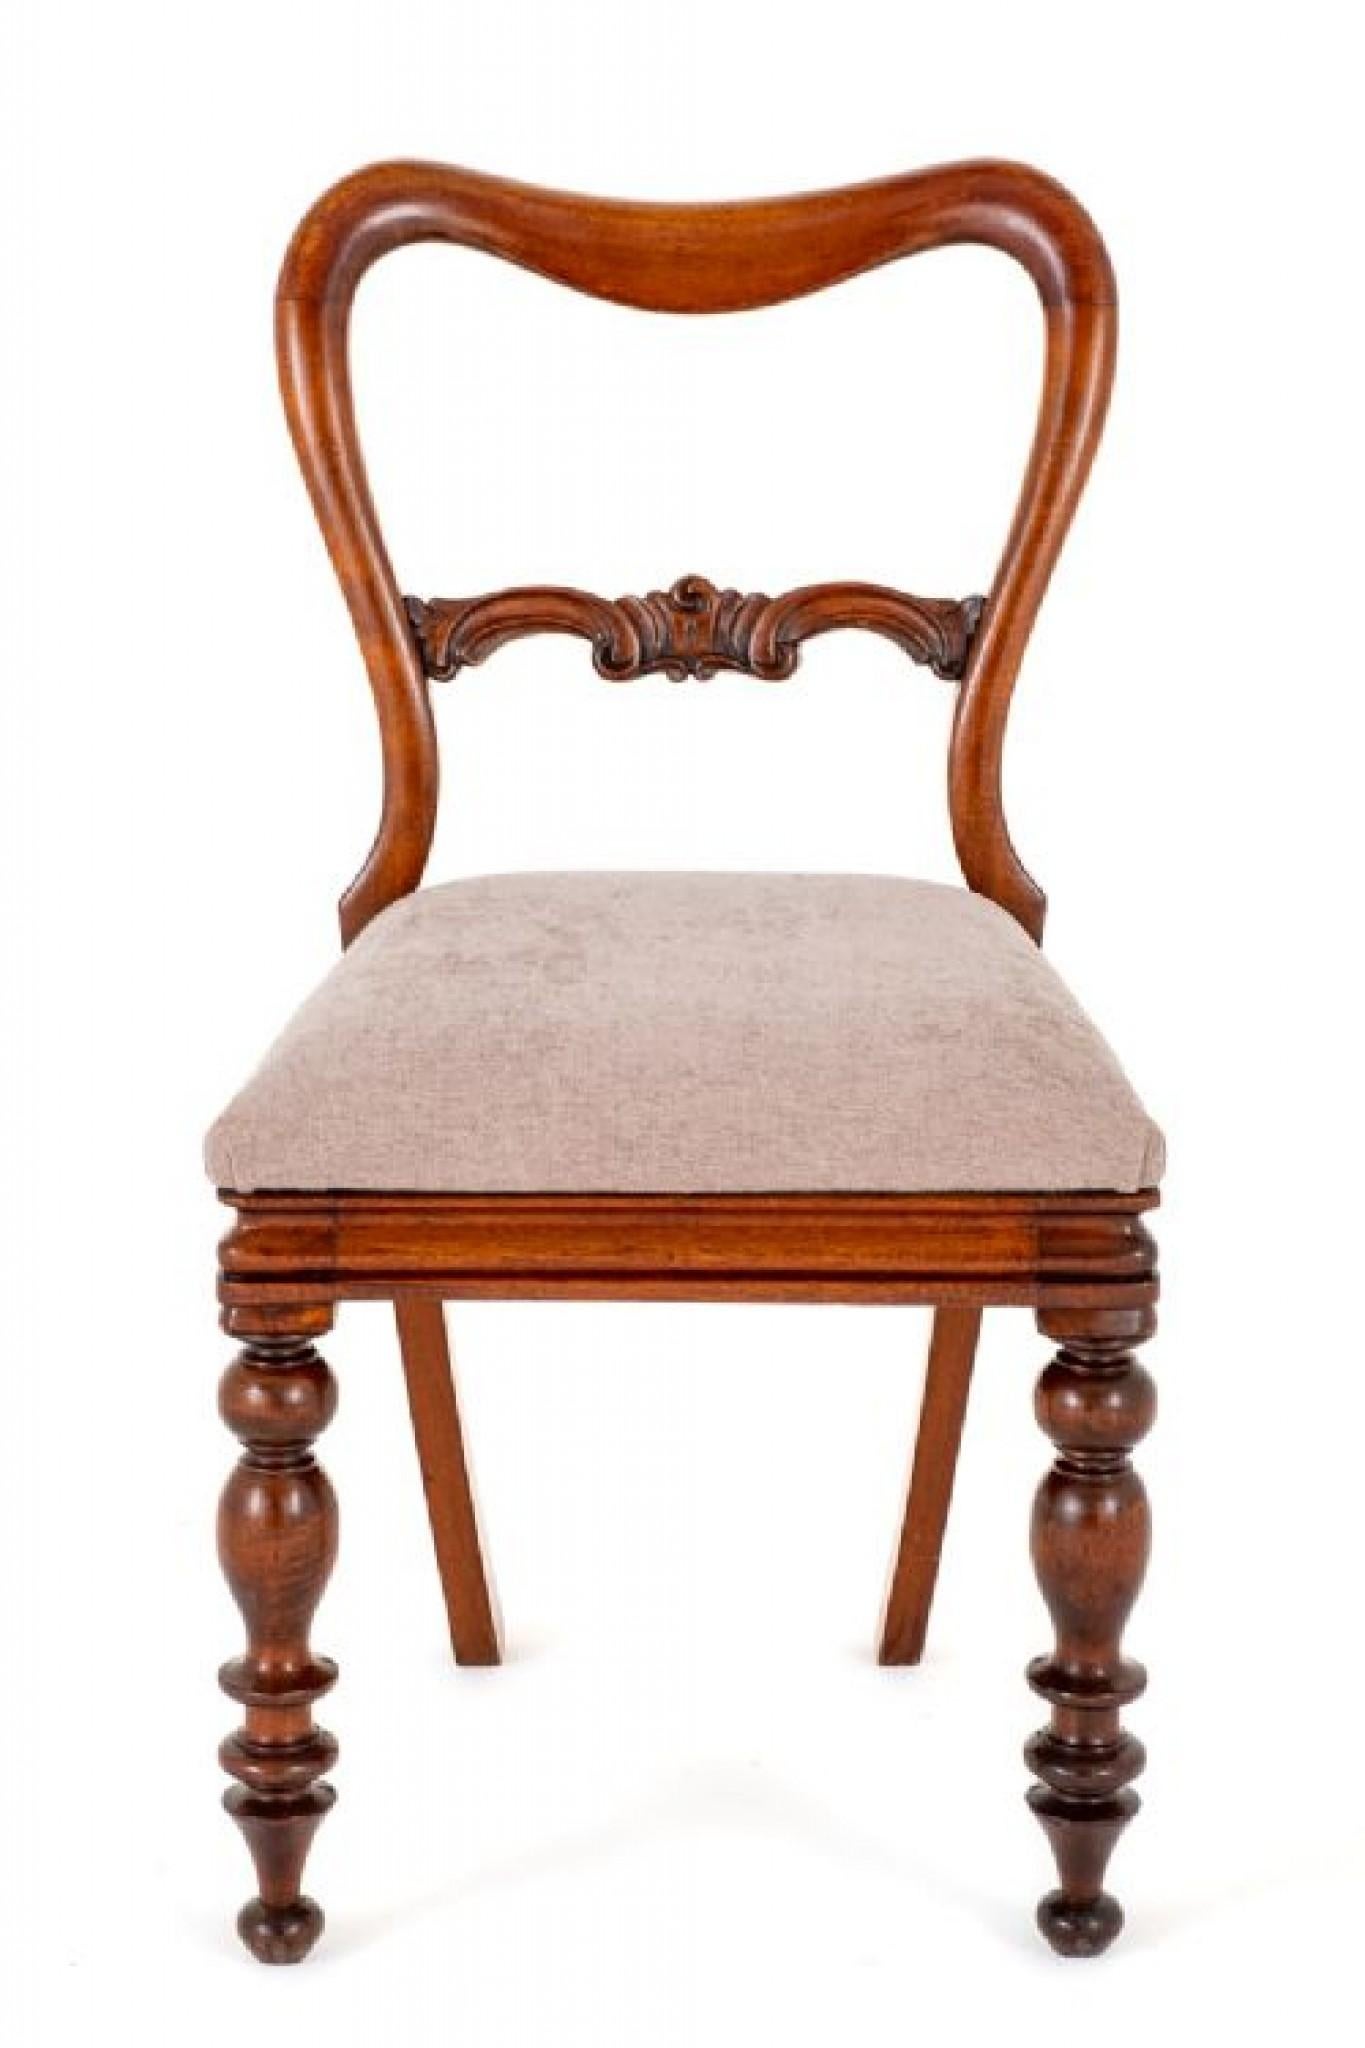 Set of 6 Victorian Mahogany Dining Chairs.
Circa 1850
These chairs Have Turned Front Legs and Sabre back Legs.
The Chairs Feature Recently Re Upholstered Lift Out Seats.
Having a Shaped Back, Shaped Cresting Rails and a Carved Centre Rail.
Presented